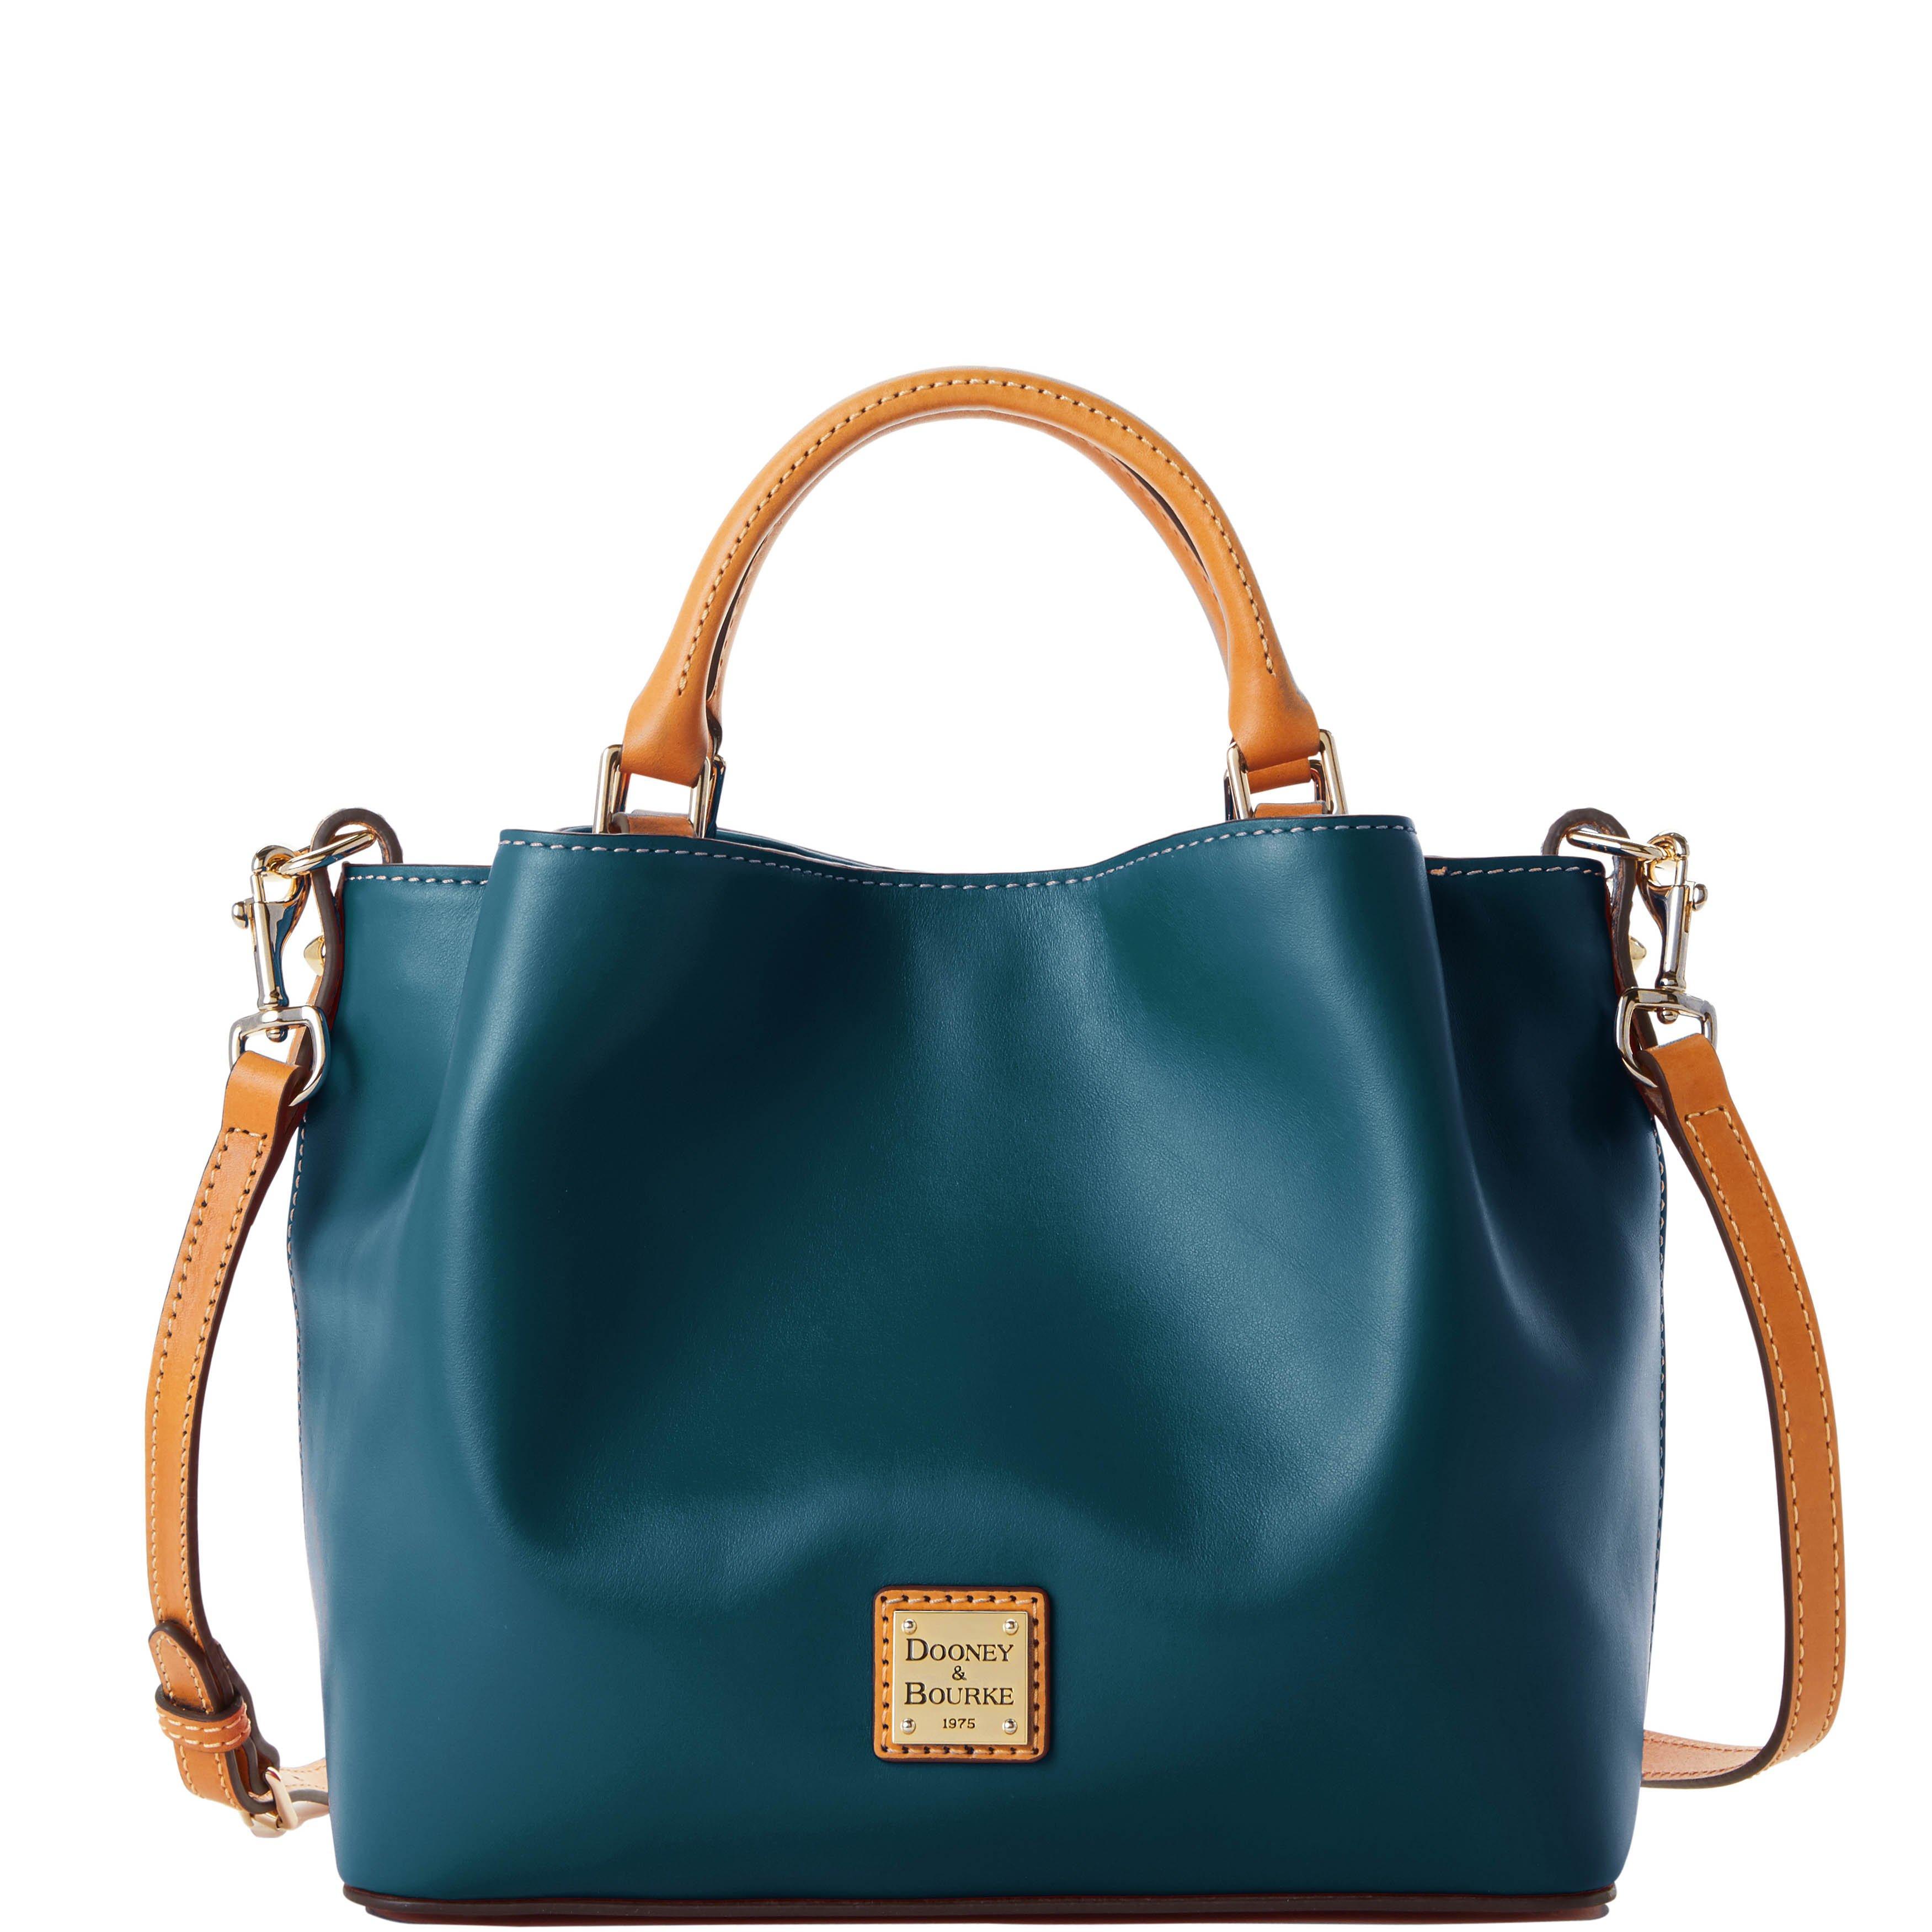 Dooney & Bourke Wexford Leather Small Brenna in Deep Teal (Blue) - Save ...